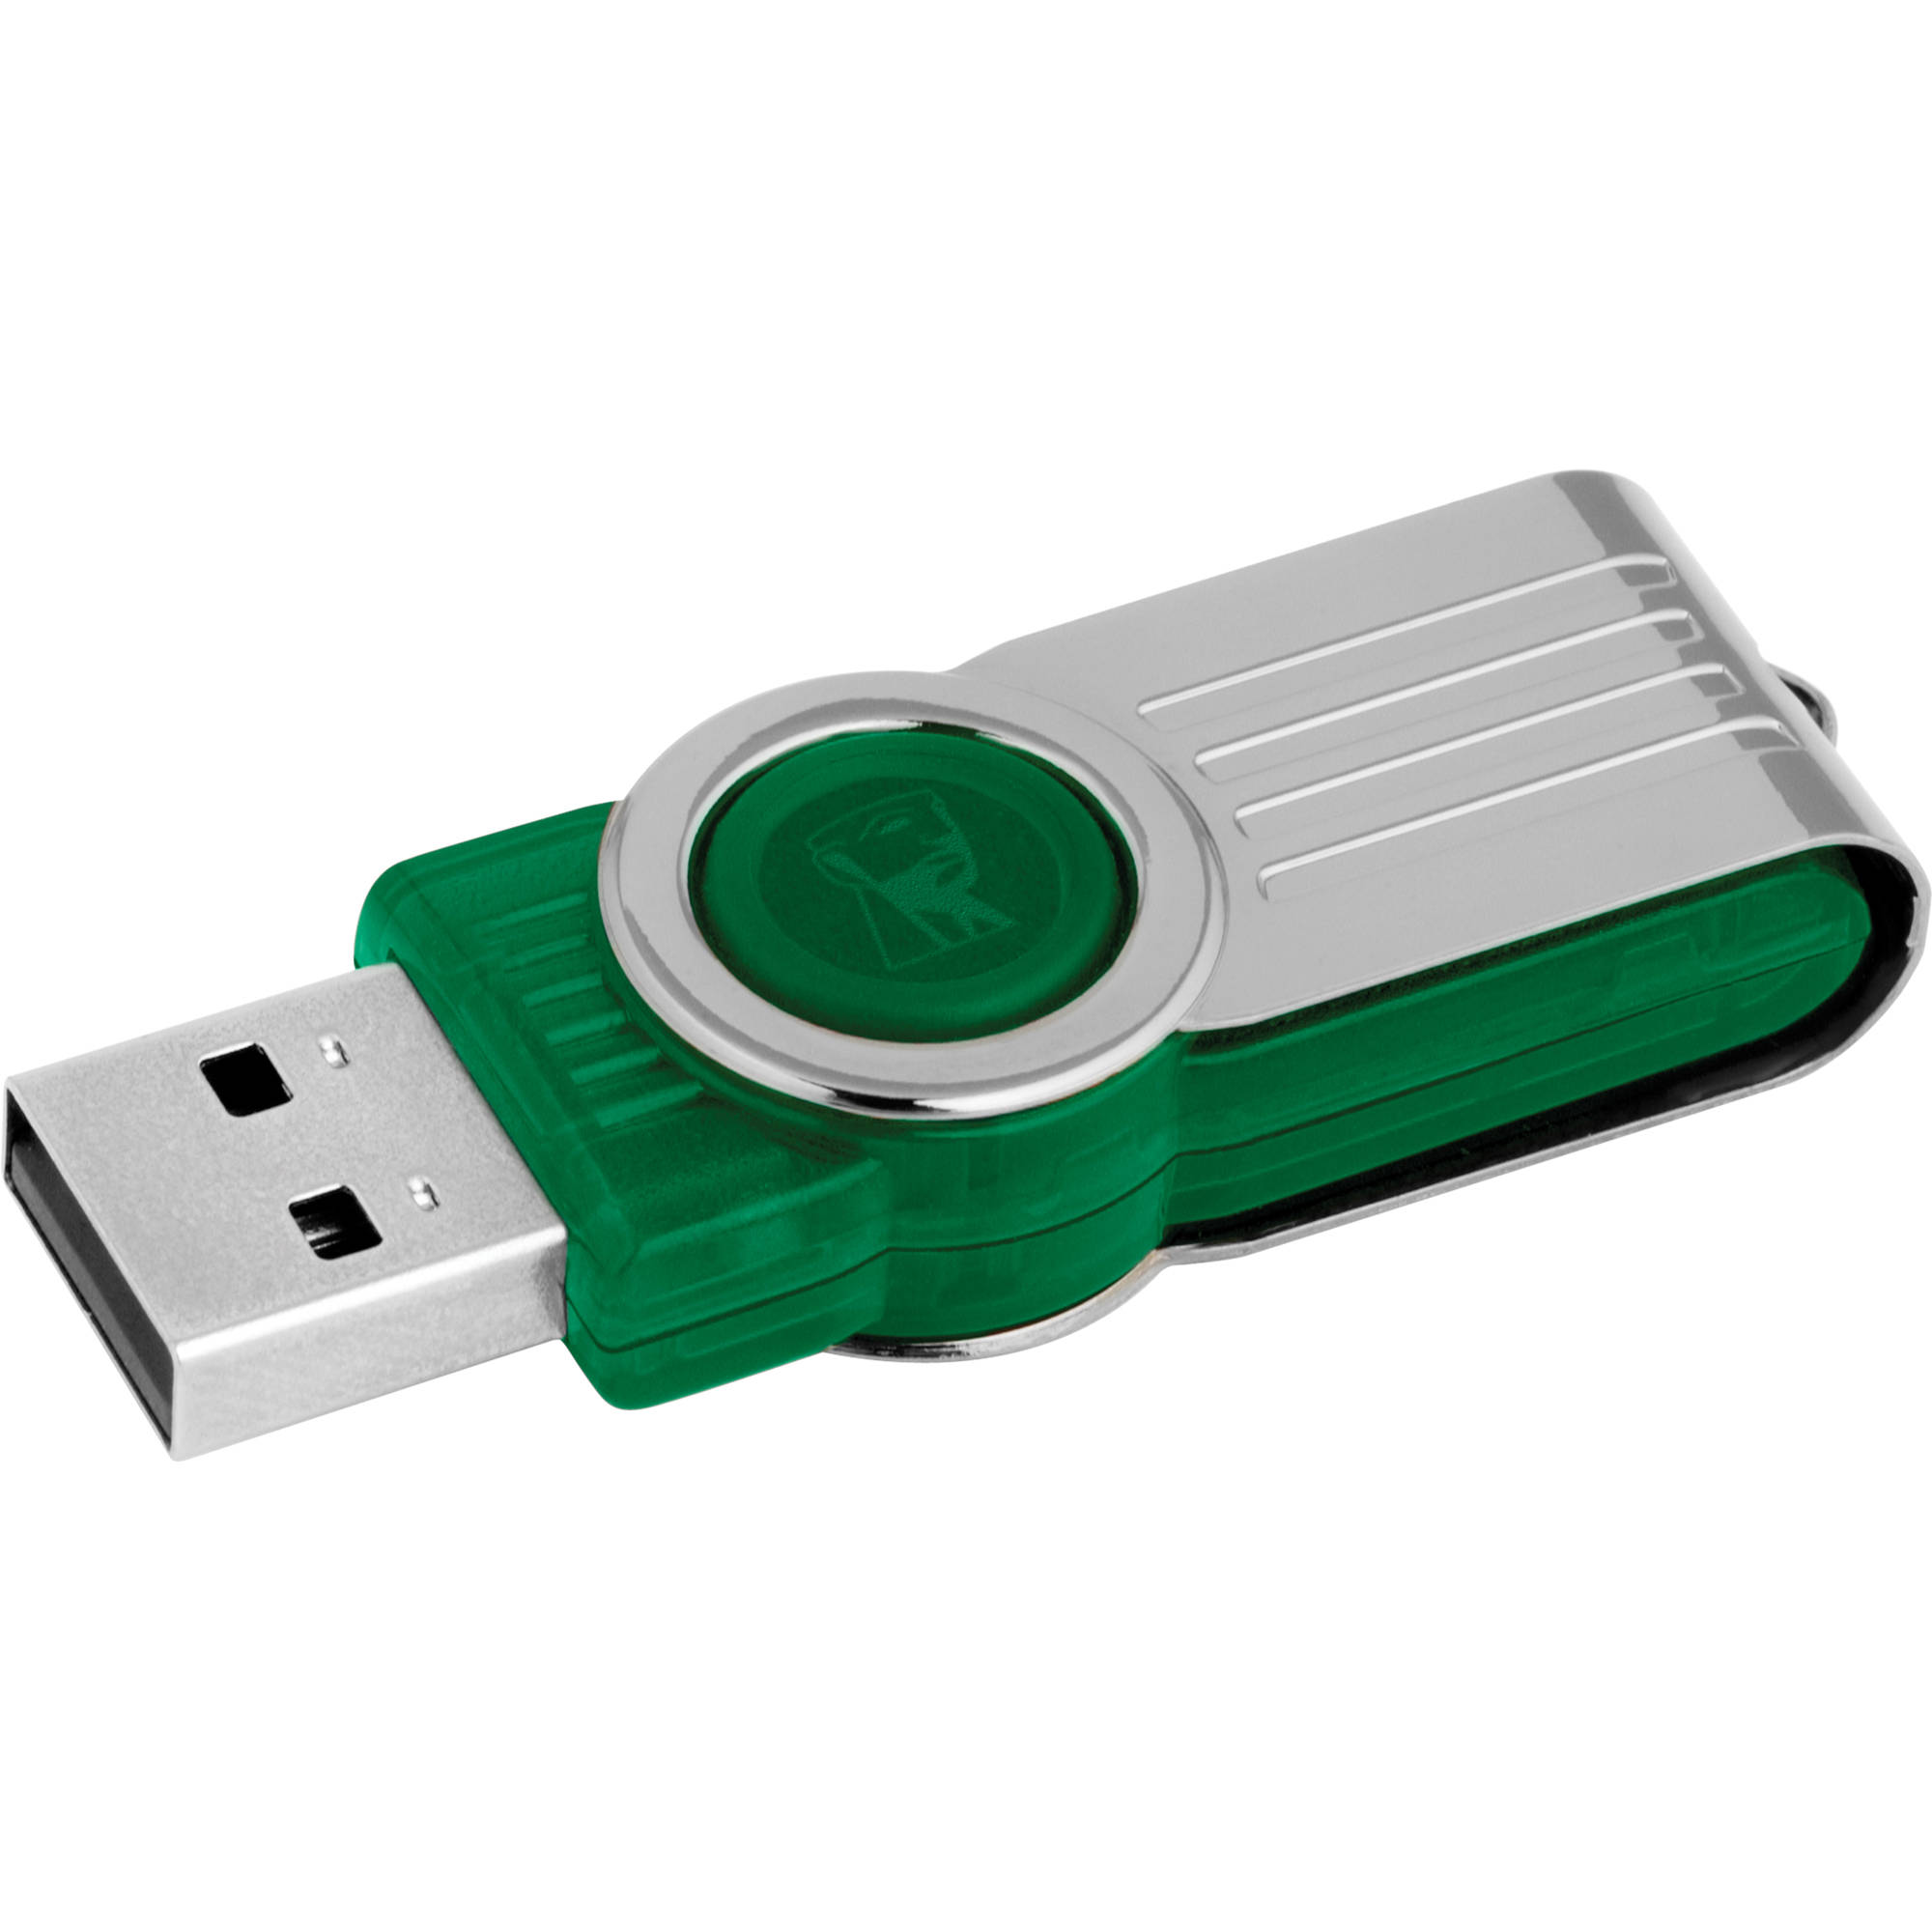 linux for g4 mac usb